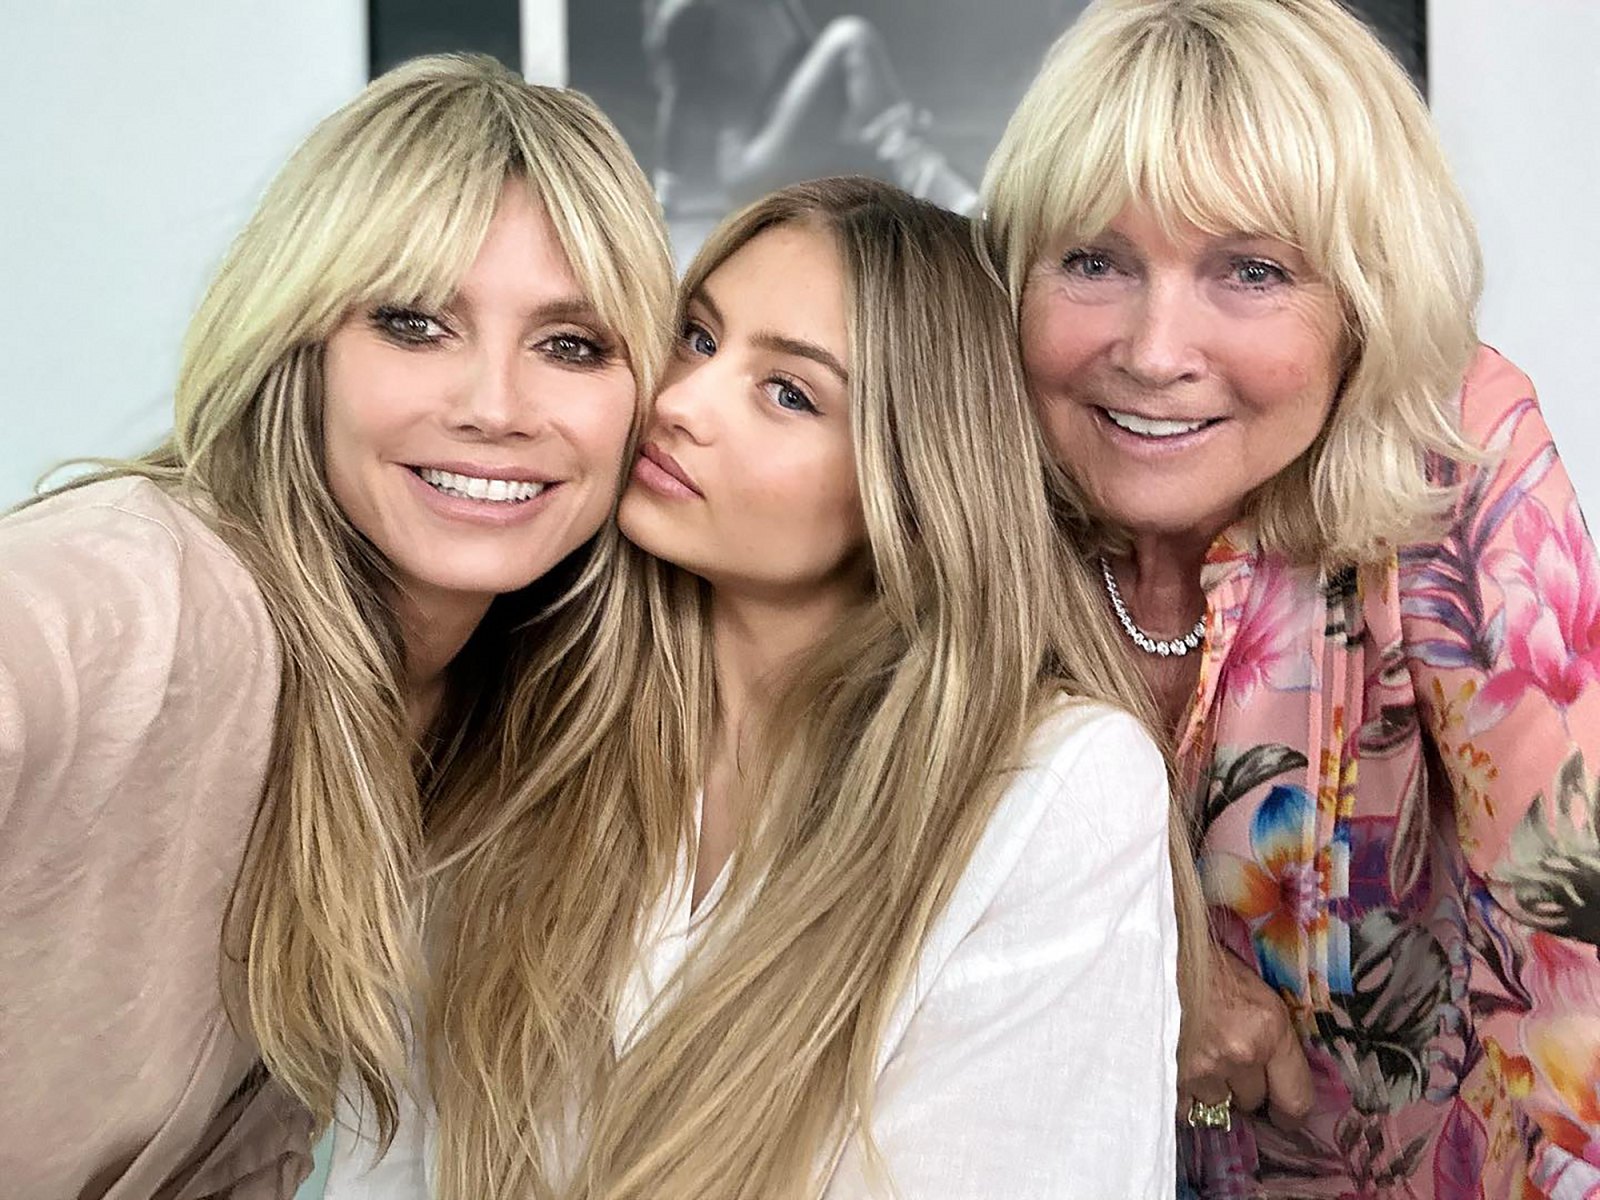 Heidi Klum Shares Rare Photo With Her Mother Erna And Look Alike Daughter Leni ?w=1600&quality=86&strip=all